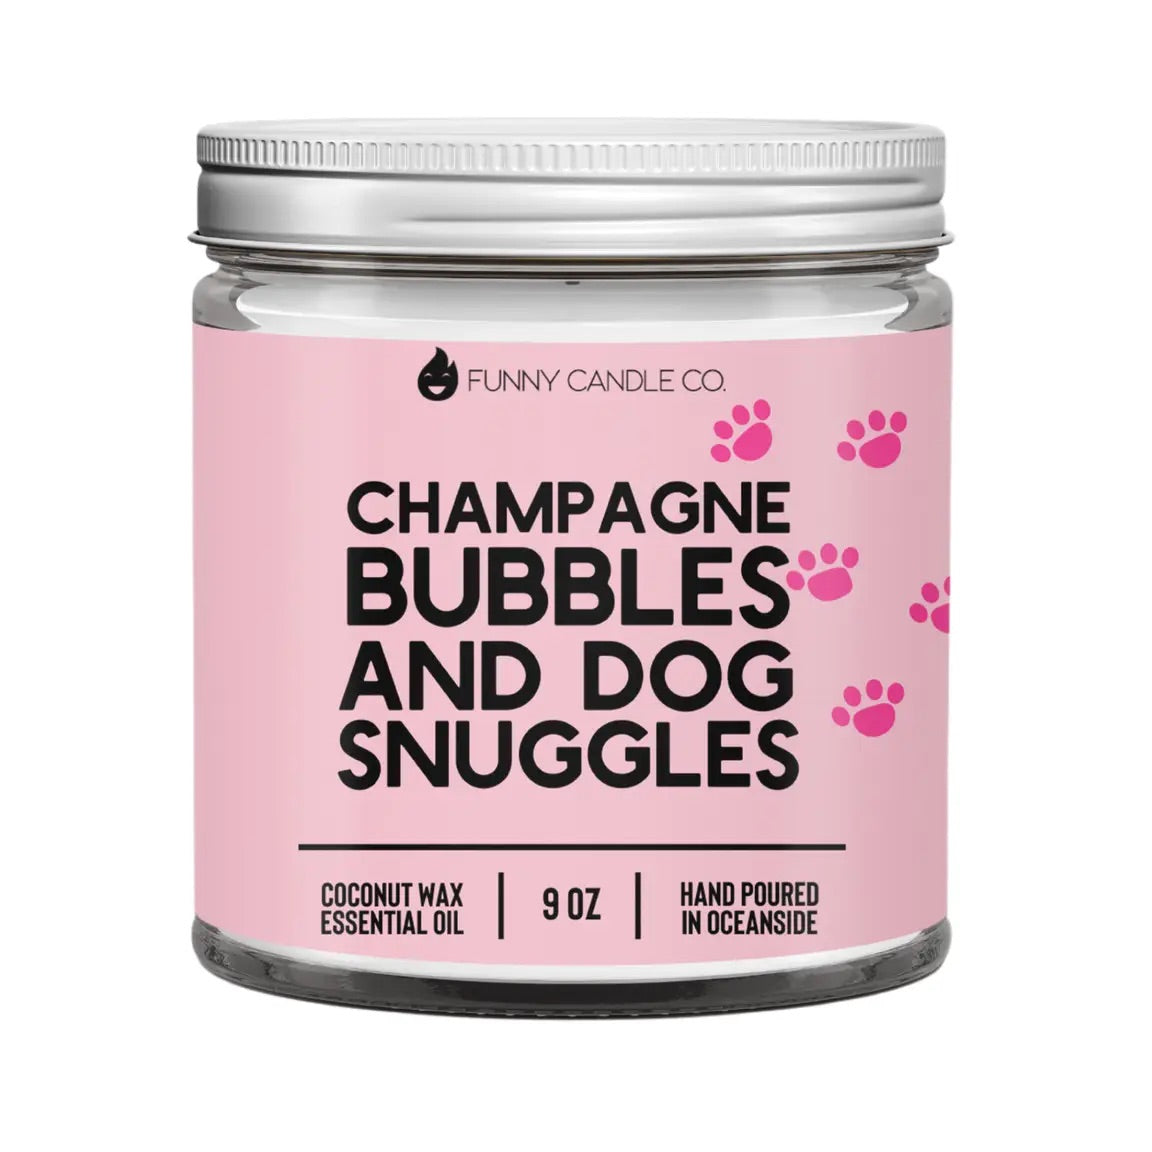 Champagne Bubbles and Dog Snuggles Candle